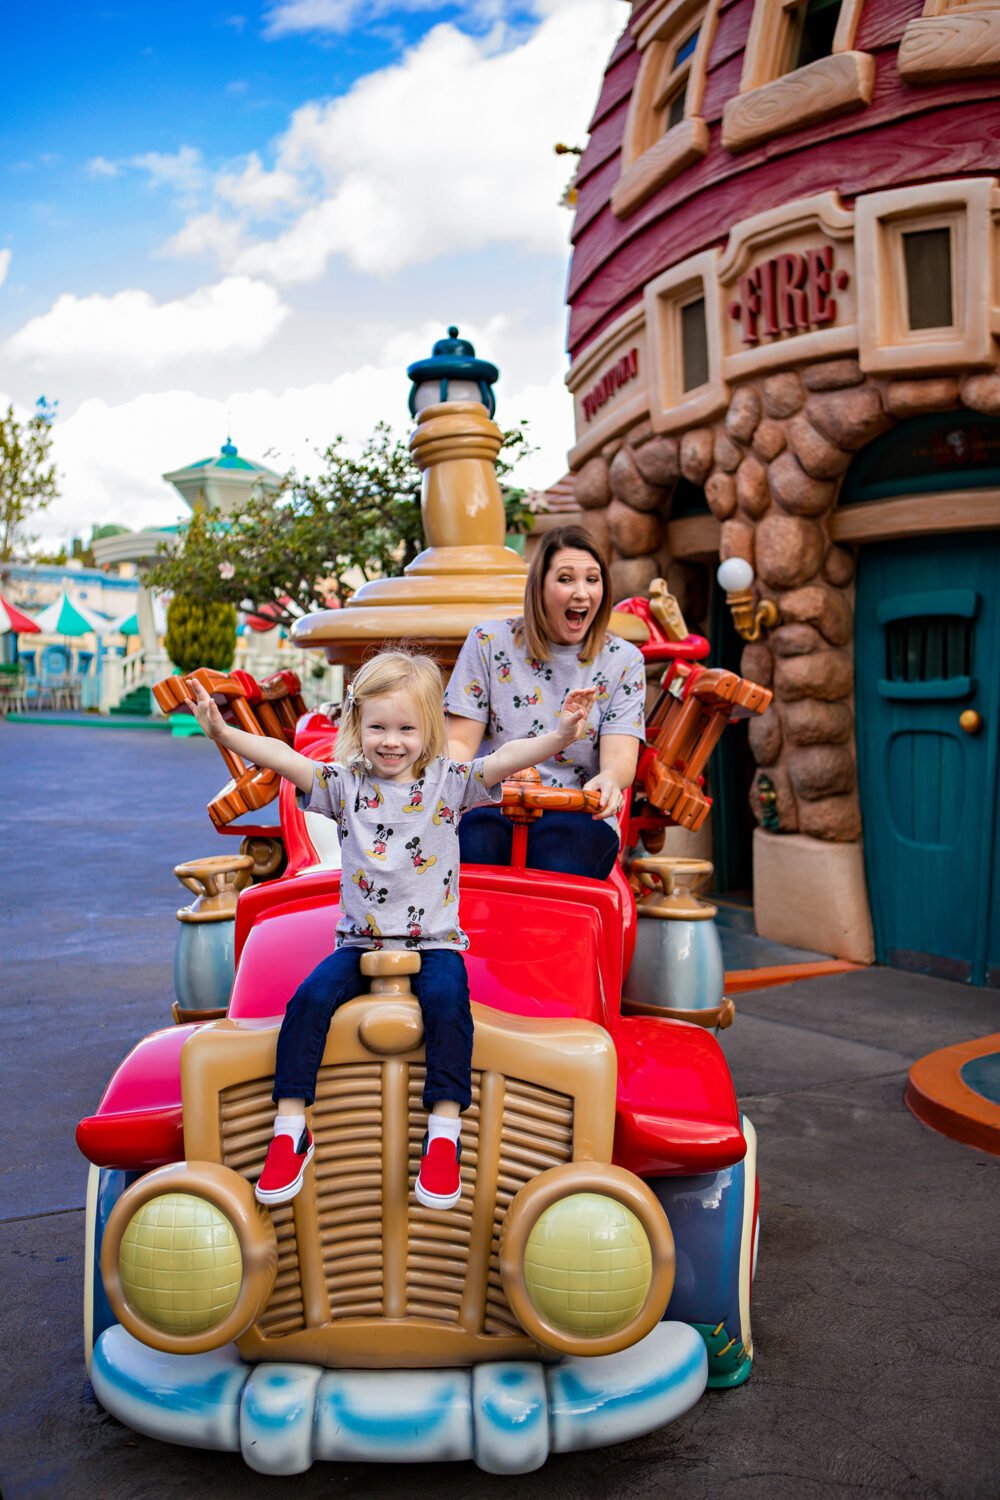 Want to know which Disneyland rides are best for toddlers and preschoolers? This is the ultimate guide to Disneyland rides!